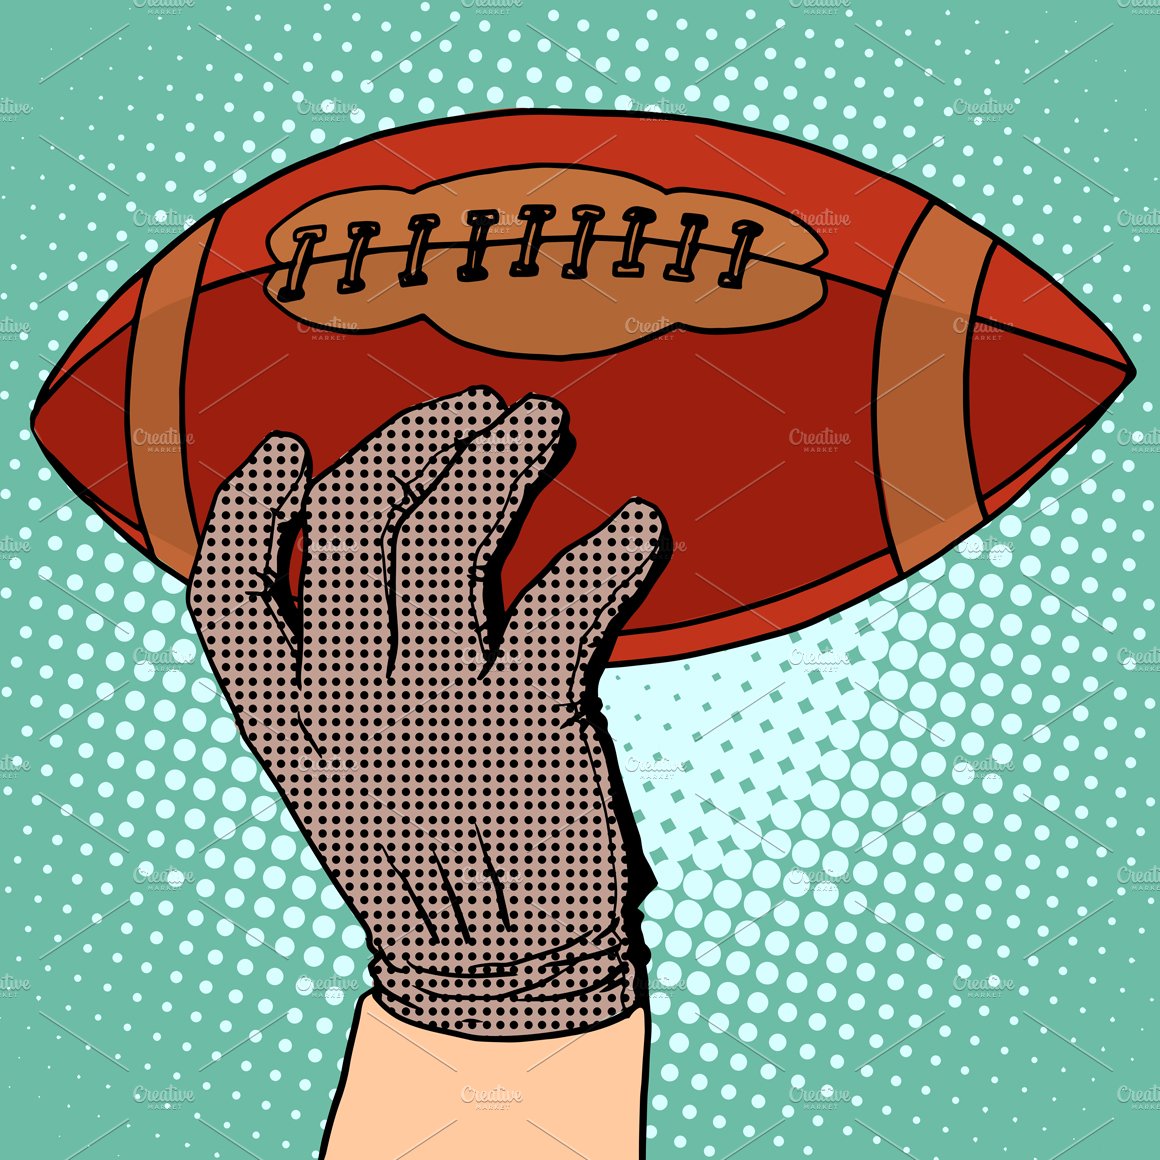 The ball of American football cover image.